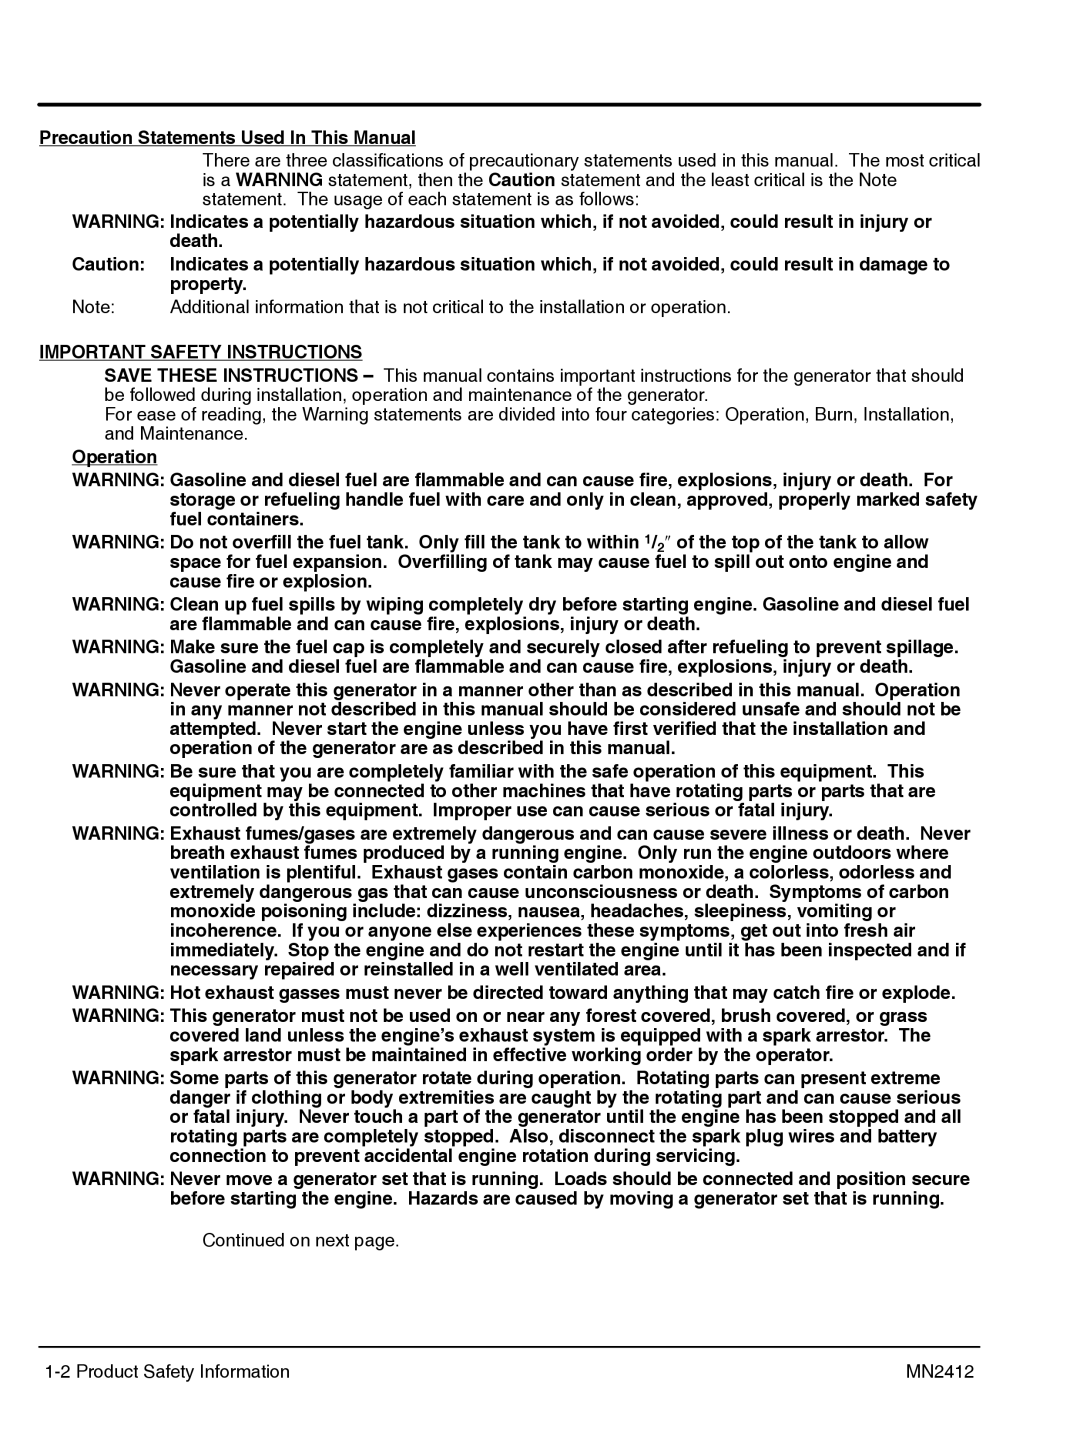 Baldor MN2412 manual Precaution Statements Used In This Manual, Property, Operation 